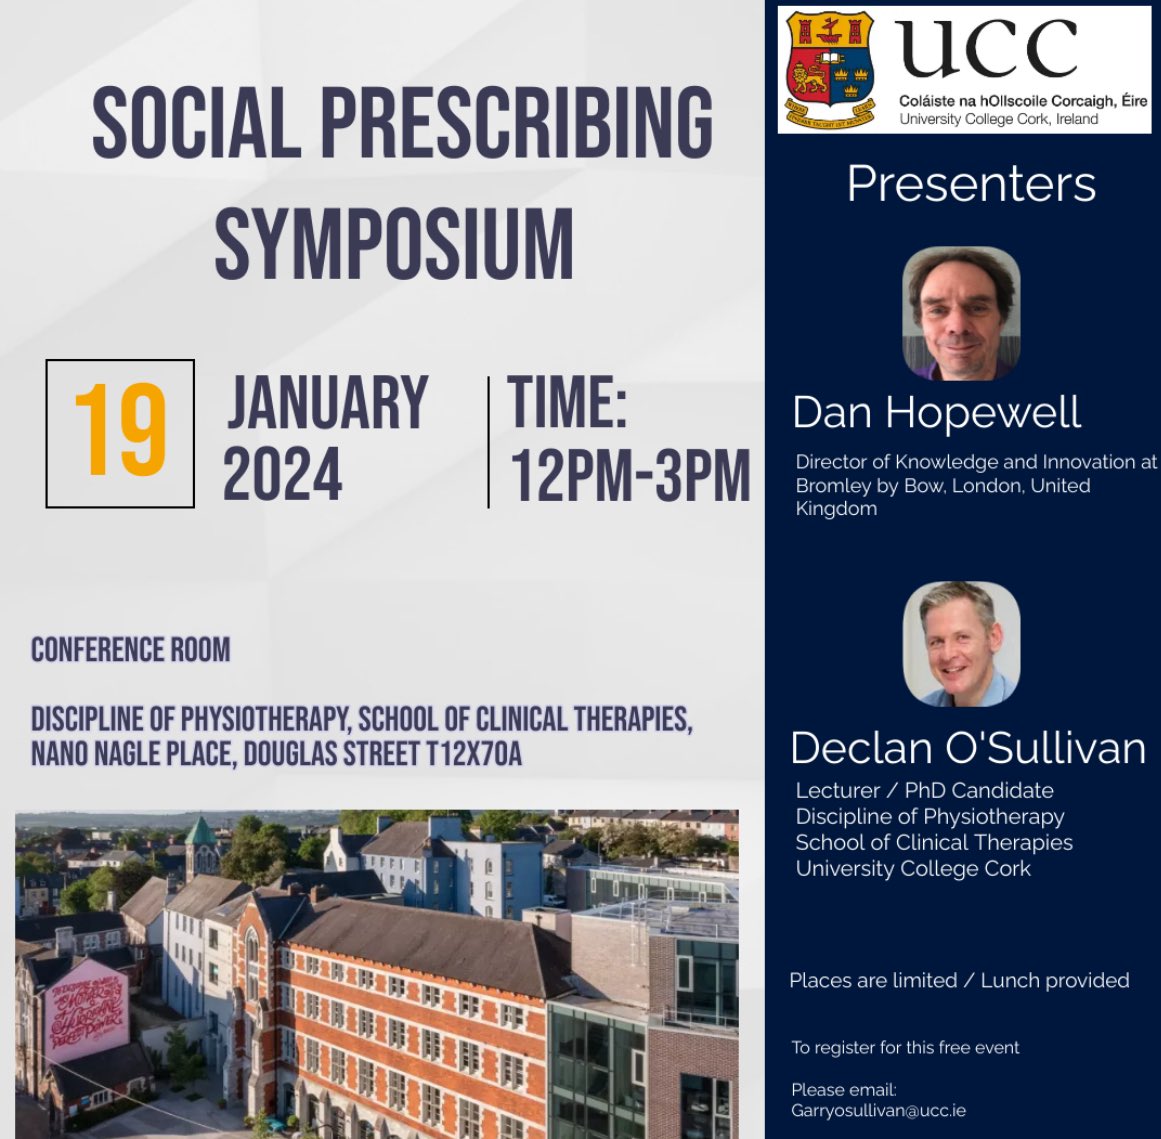 Upcoming at @uccphysio @UCC NanoNaglePlace. #Socialprescribing @HopewellDan @Bromley_by_Bow Places limited. Free Event.